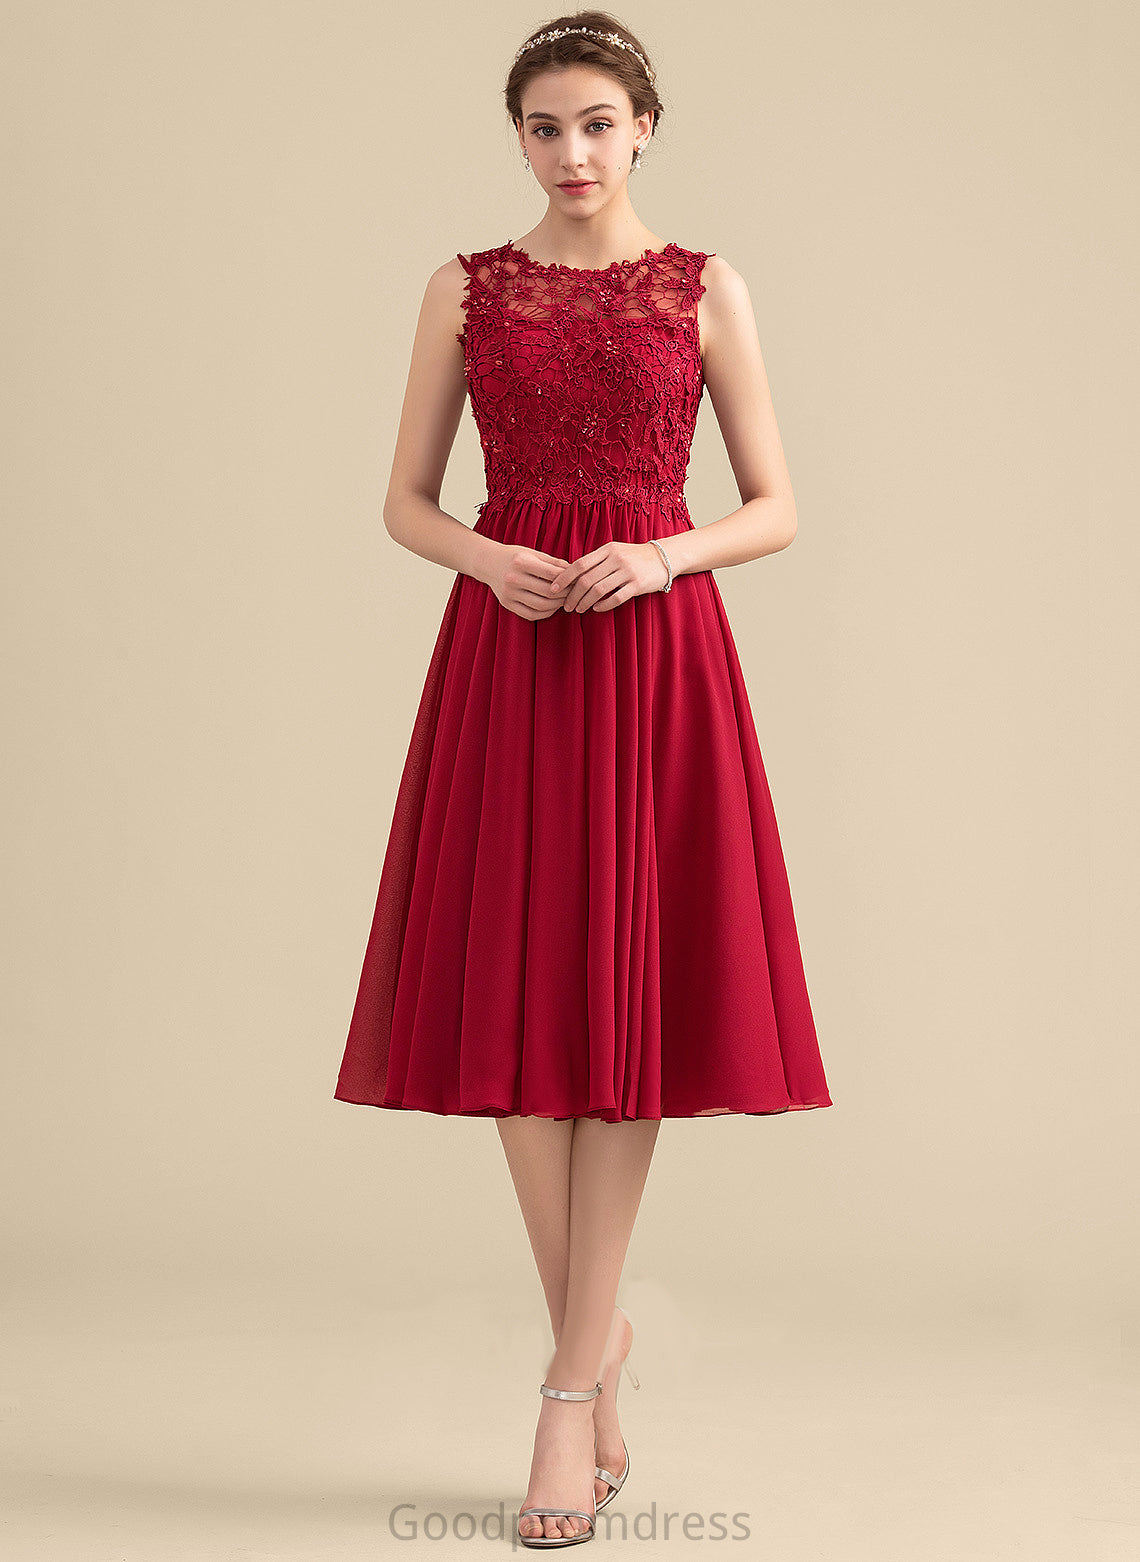 Knee-Length A-Line Neck Dress Beading Naima Lace With Homecoming Chiffon Scoop Lace Homecoming Dresses